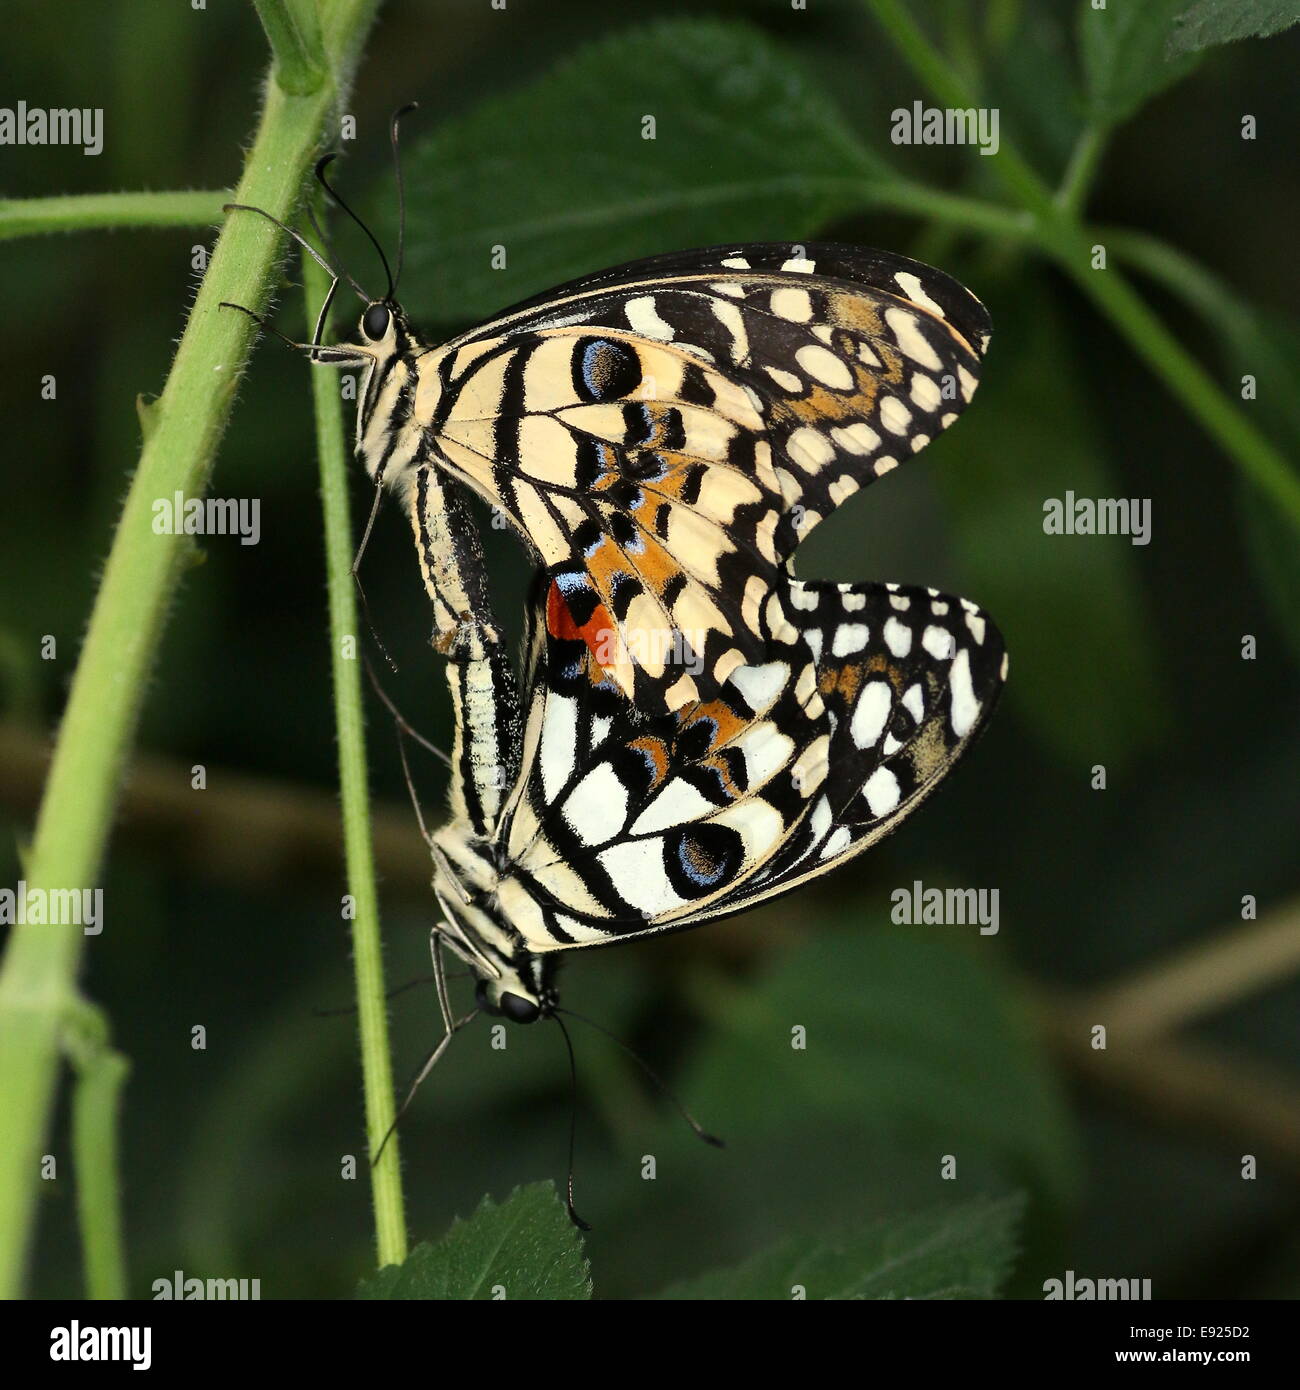 Mating Chequered Swallowtails (Papilio demoleus)  a.k.a. Lemon or Lime Swallowtail or Small Citrus Butterfly Stock Photo